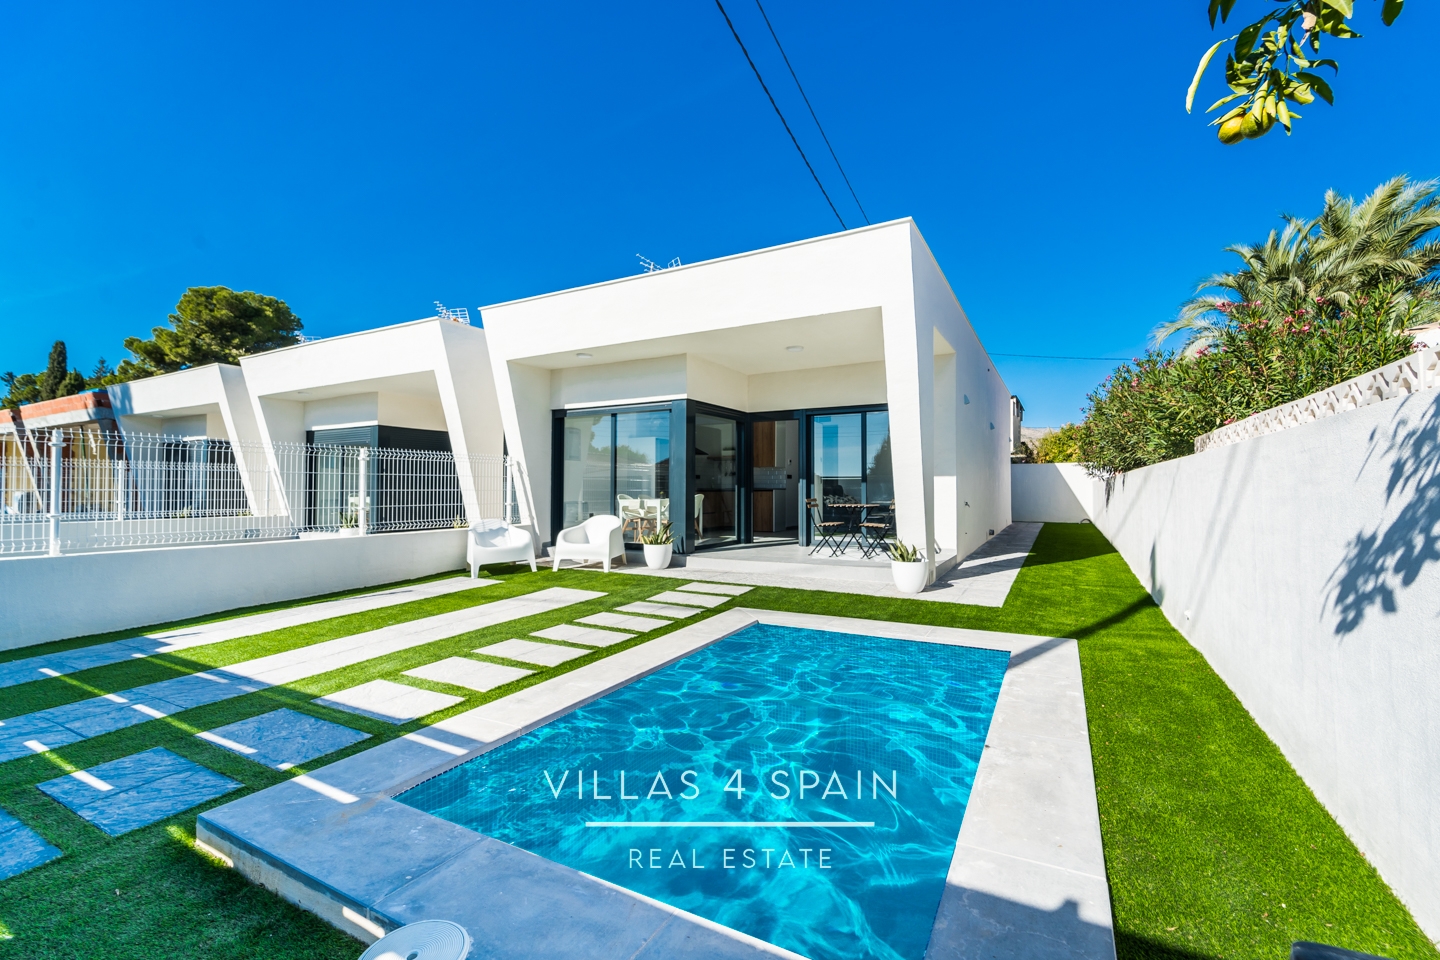 2 Bedroom 2 Bathroom New build Villa with Private Pool and parking